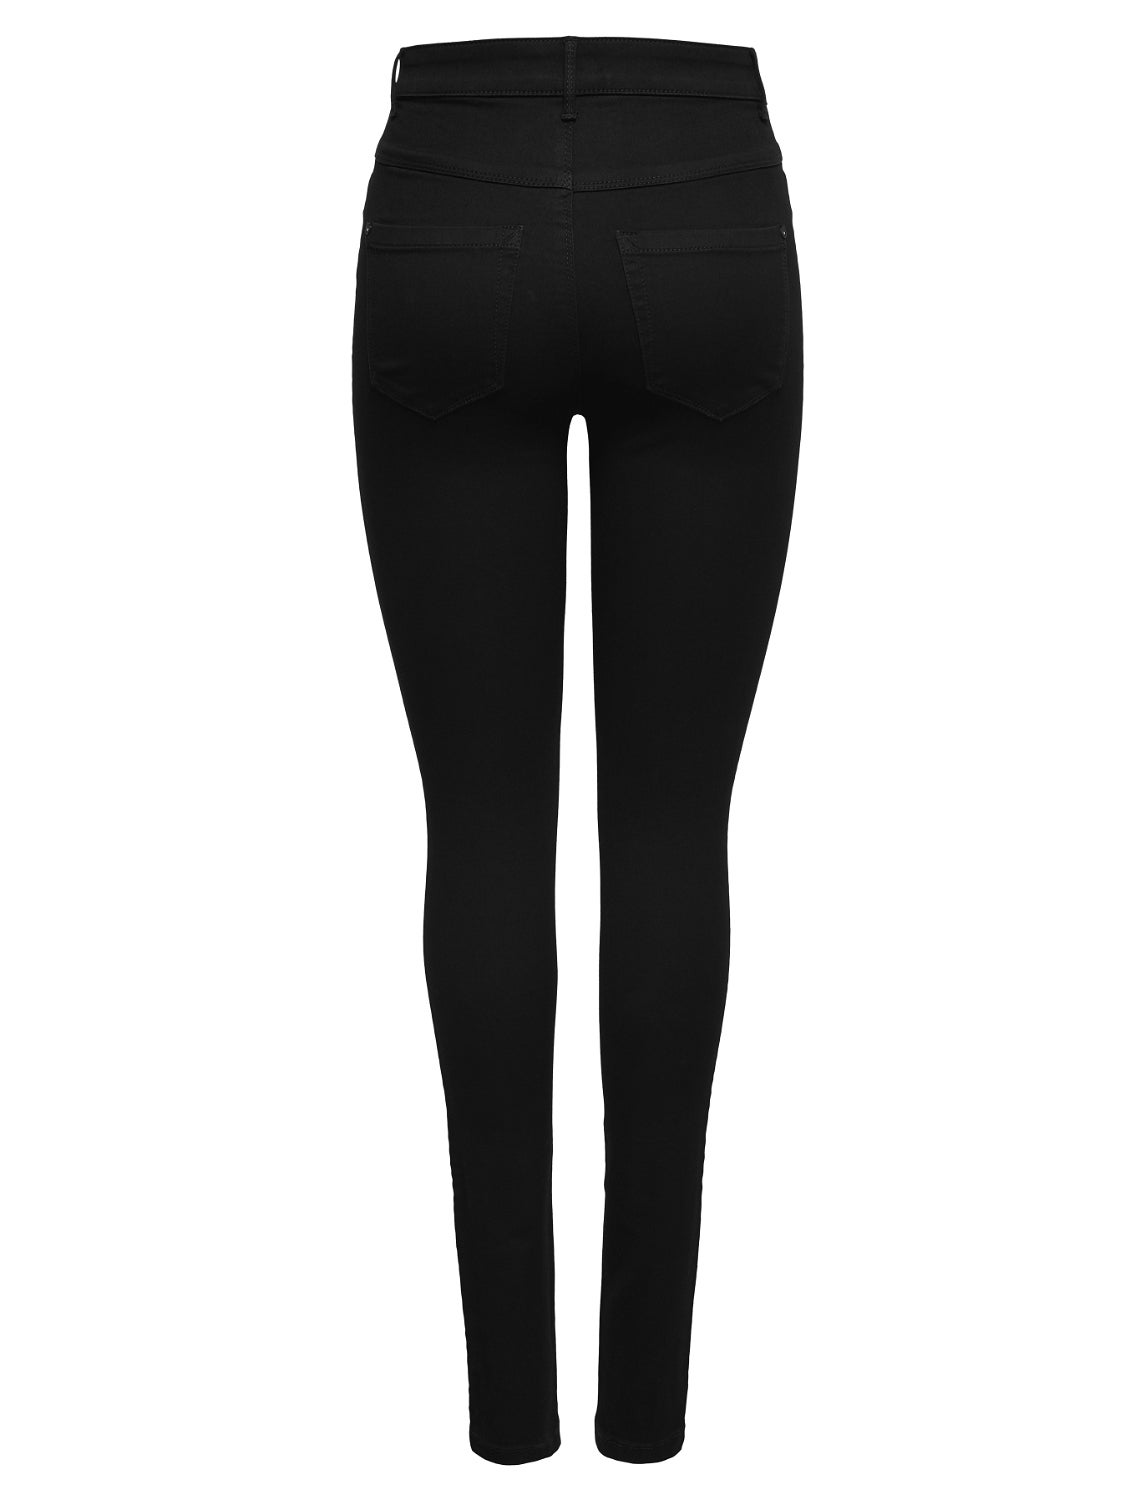 H&m Superstretch Skinny Fit Jeans Southcentre Mall